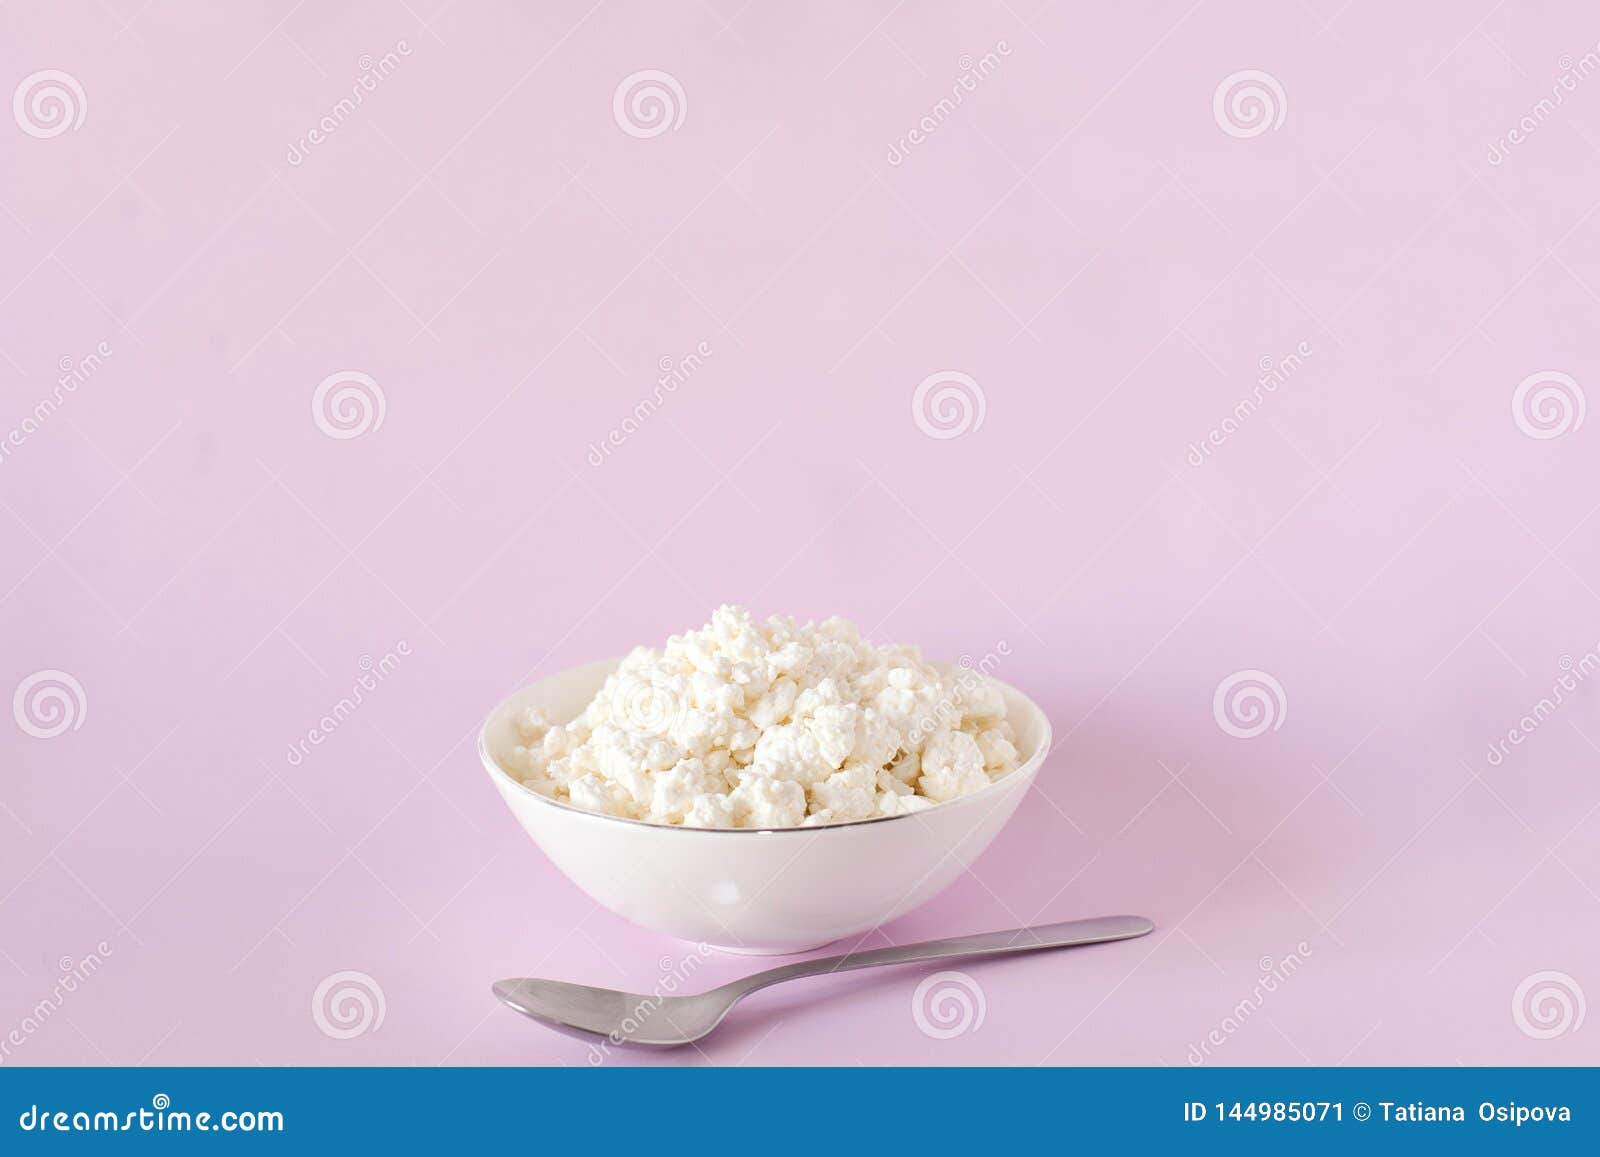 Fresh Cottage Cheese For Breakfast In A White Bowl And A Spoon In